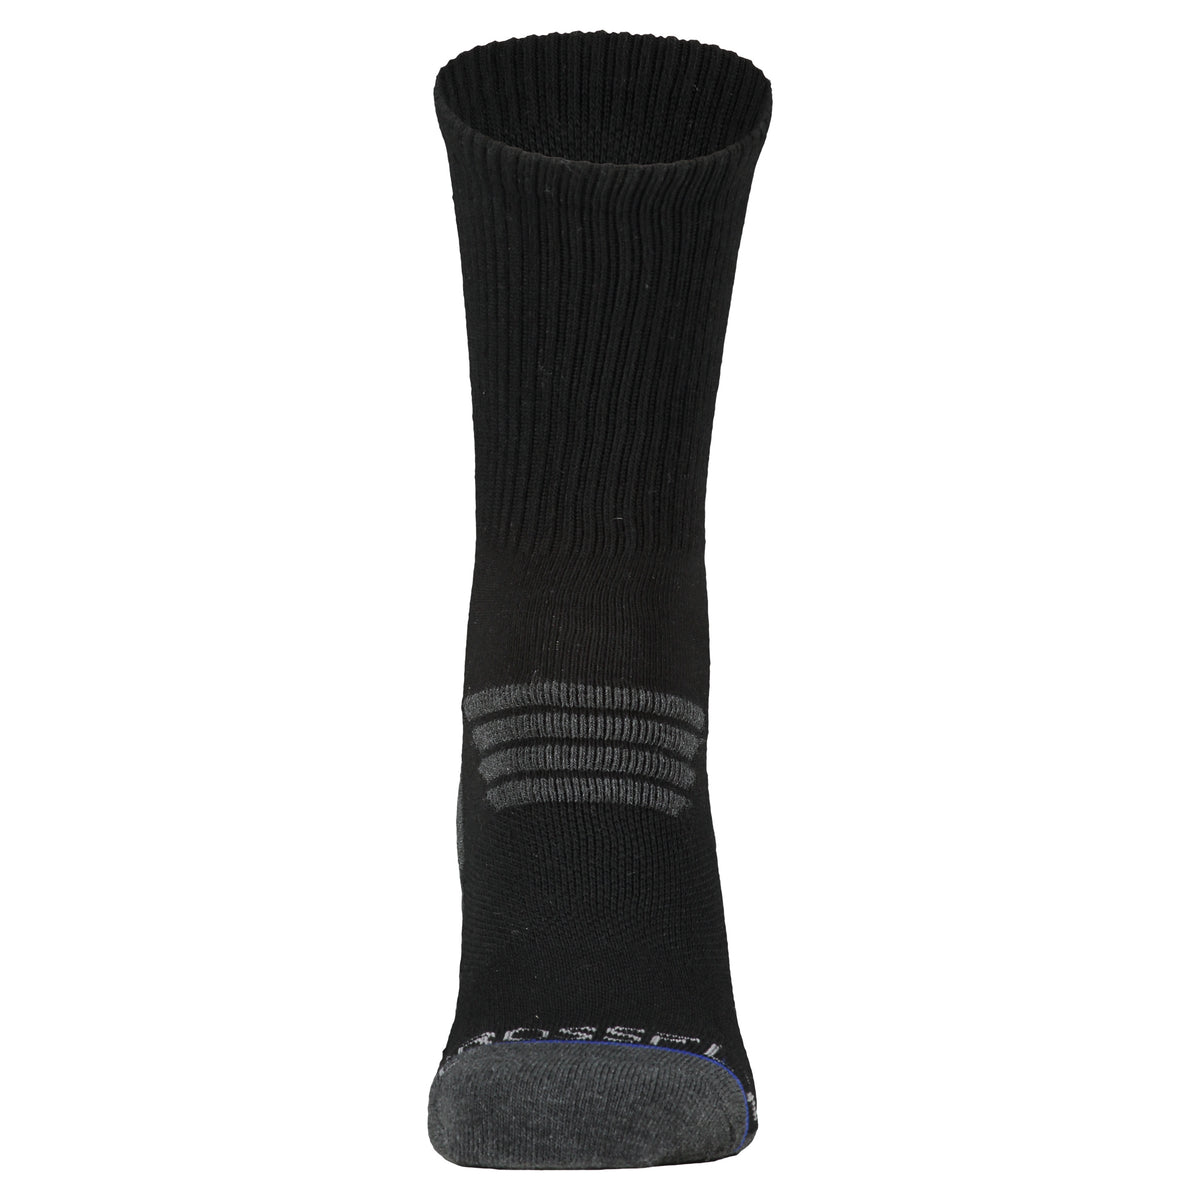 Crossfly men&#39;s Tempo Crew Socks in black / charcoal from the Performance series, featuring AirBeams and 180 Hold.